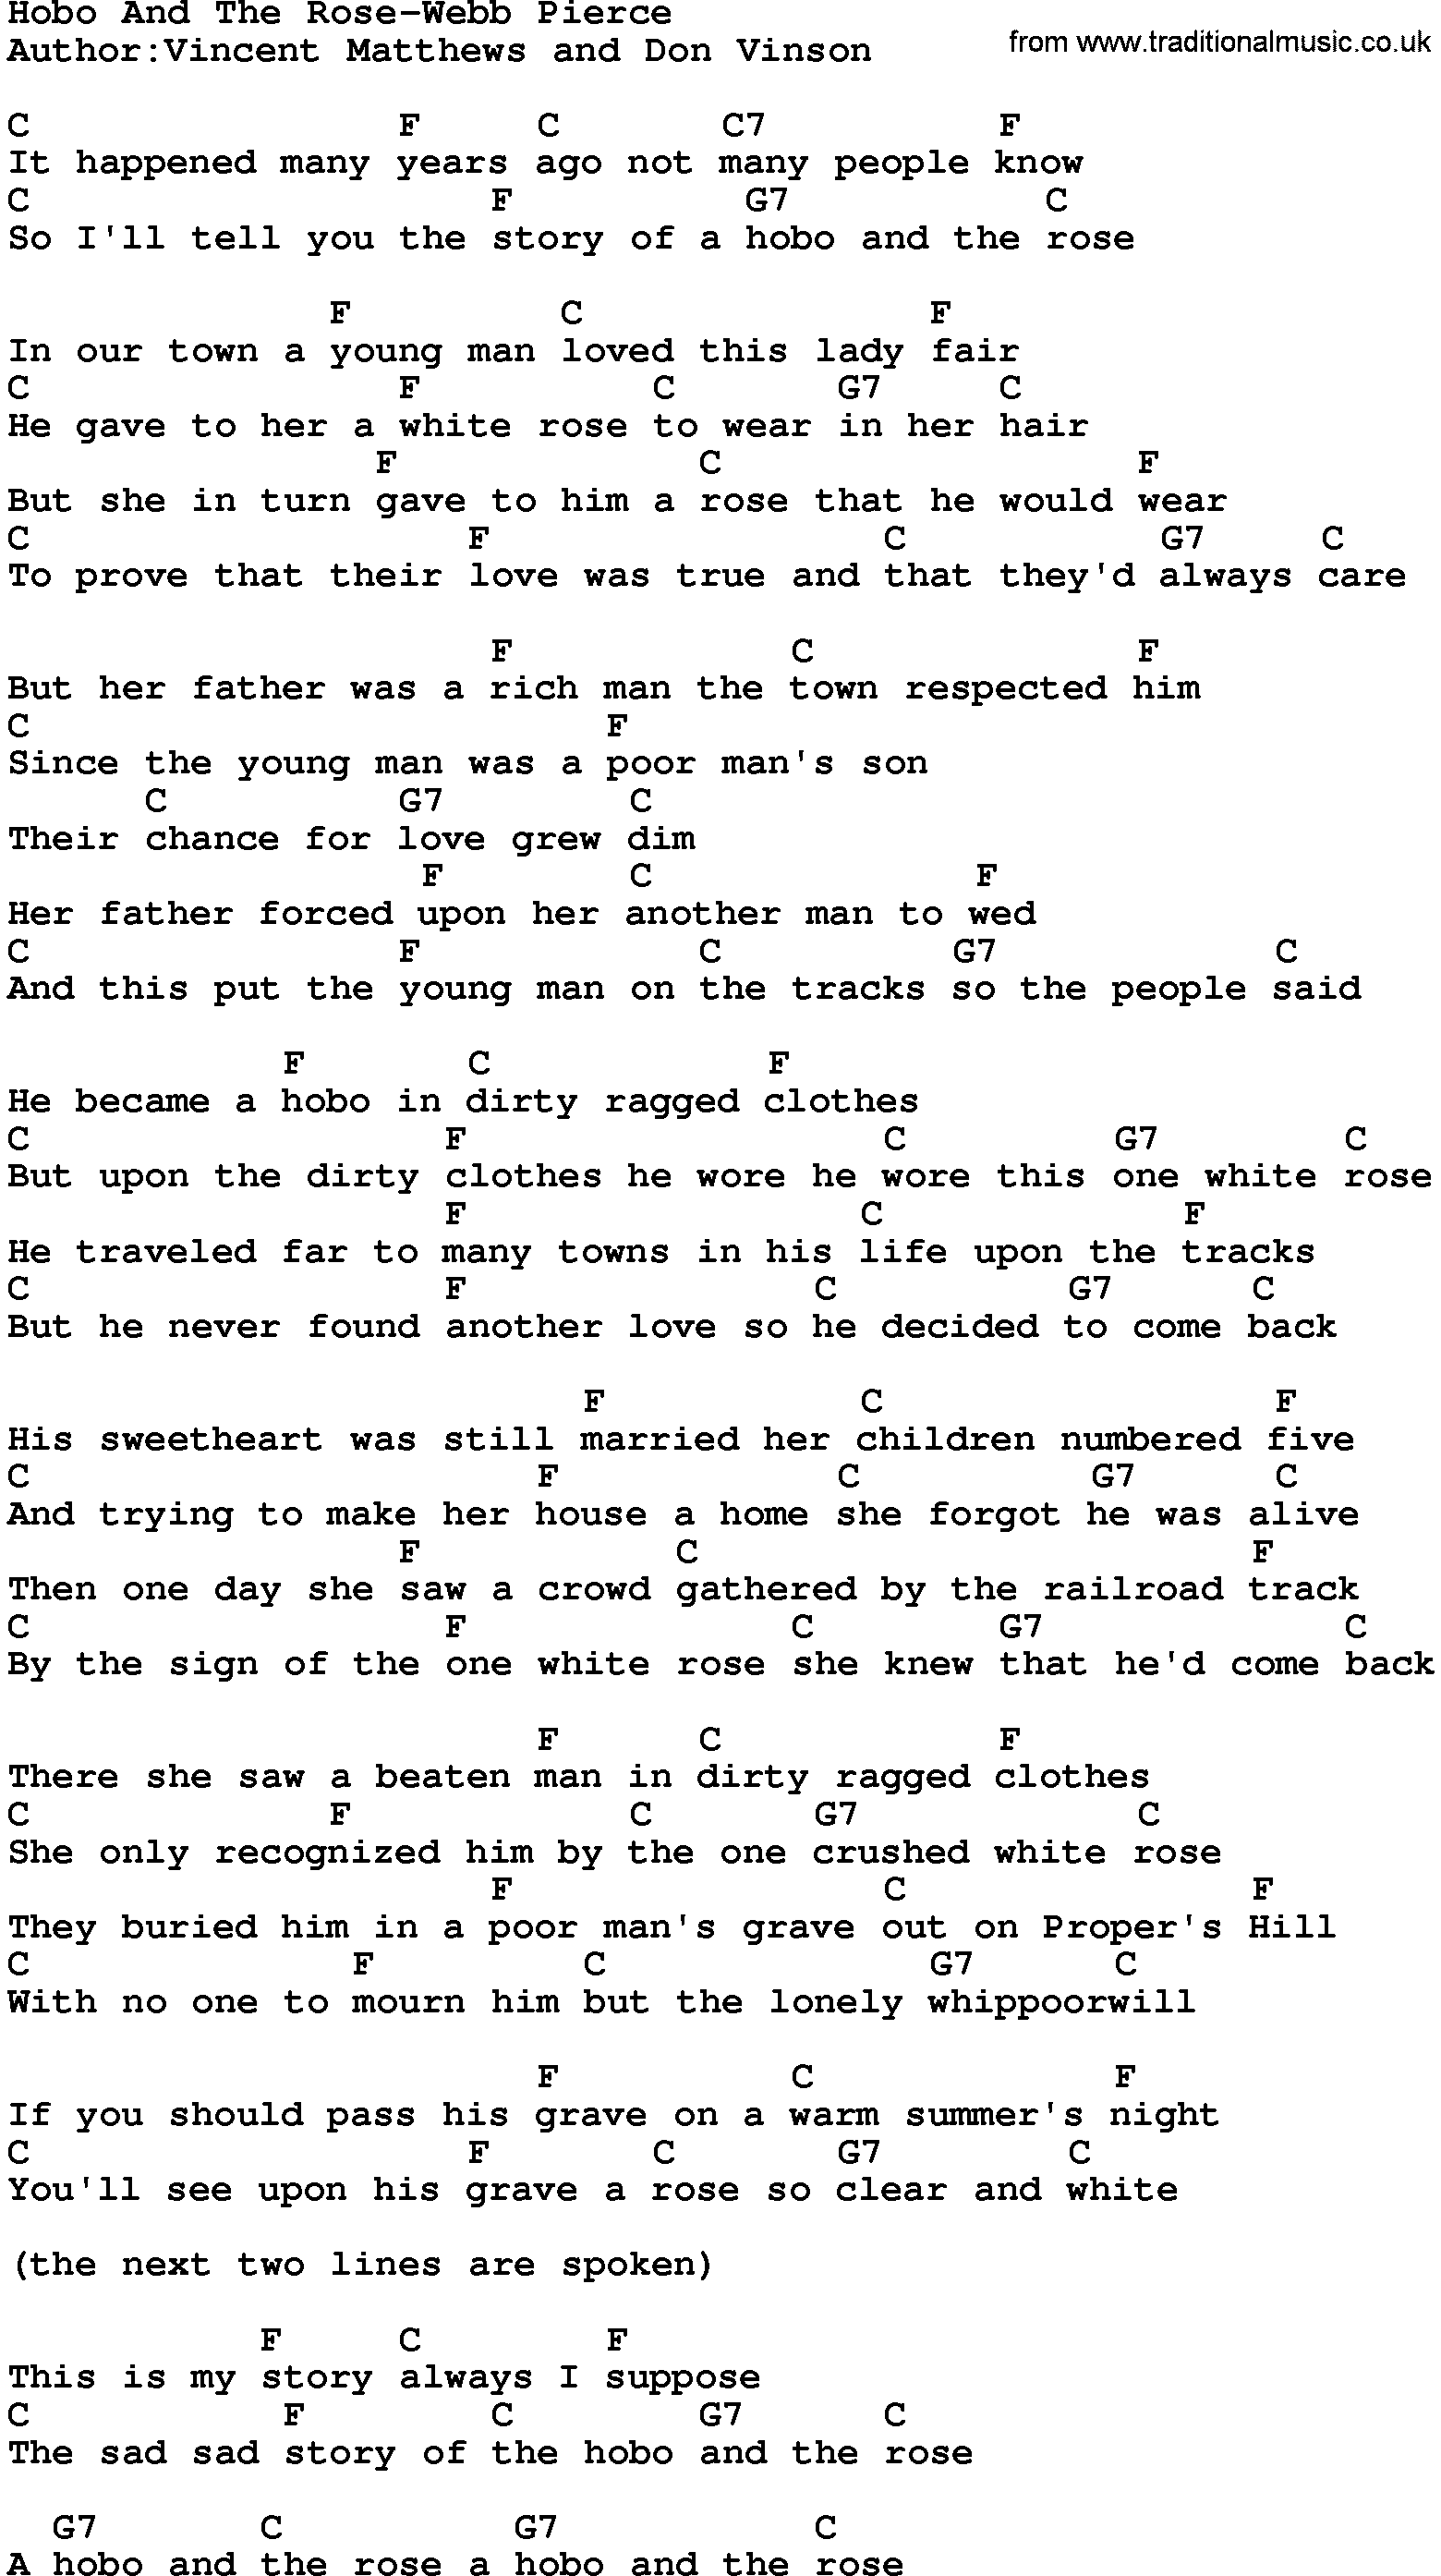 Country music song: Hobo And The Rose-Webb Pierce lyrics and chords